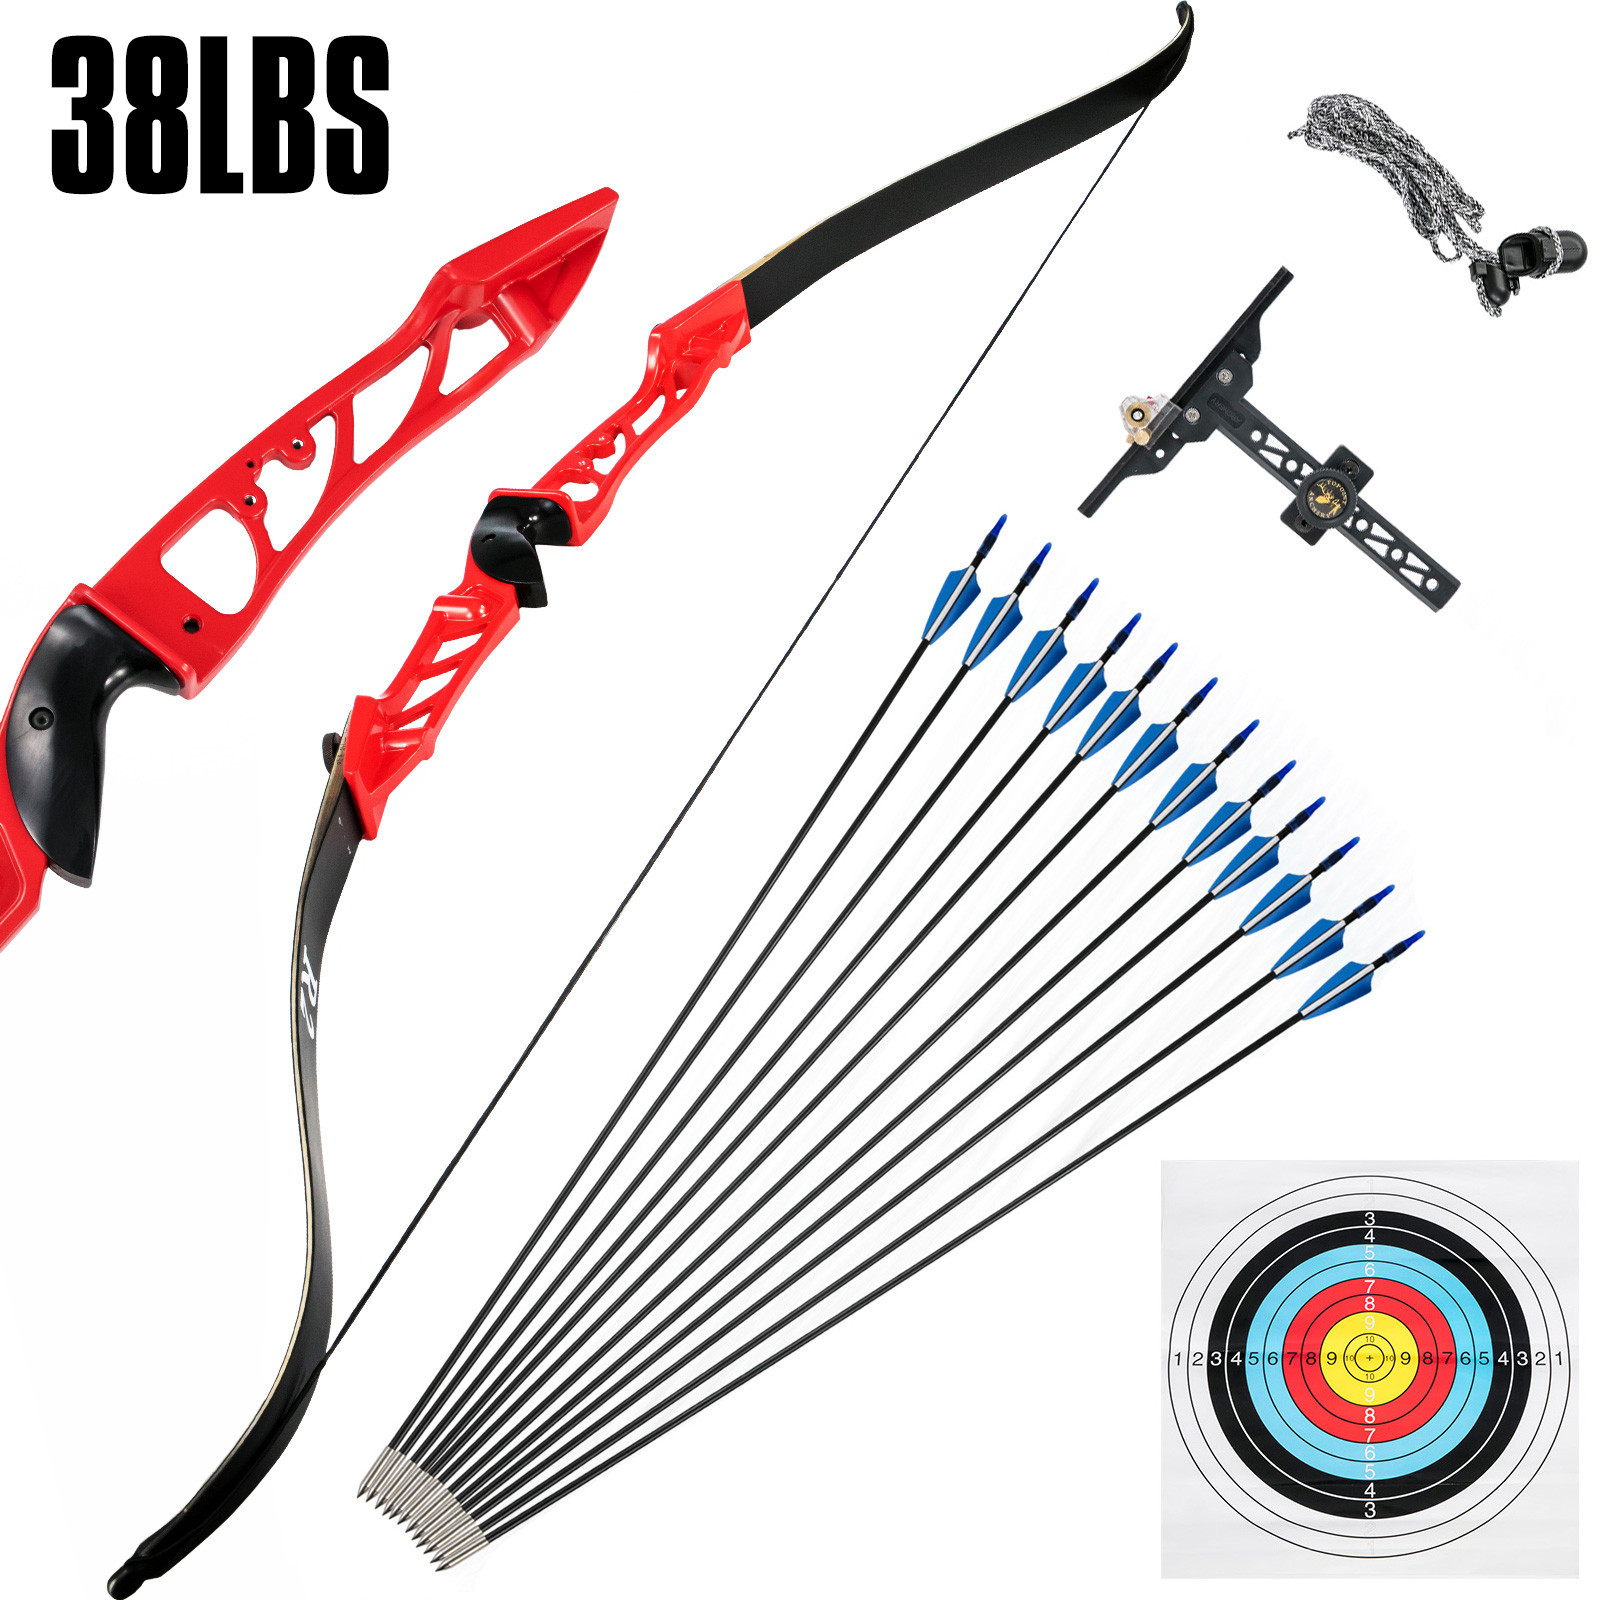 Takedown Recurve BowSet 28LBS Archery BowArrow Adults Youth Shooting Practice от Vevor Many GEOs